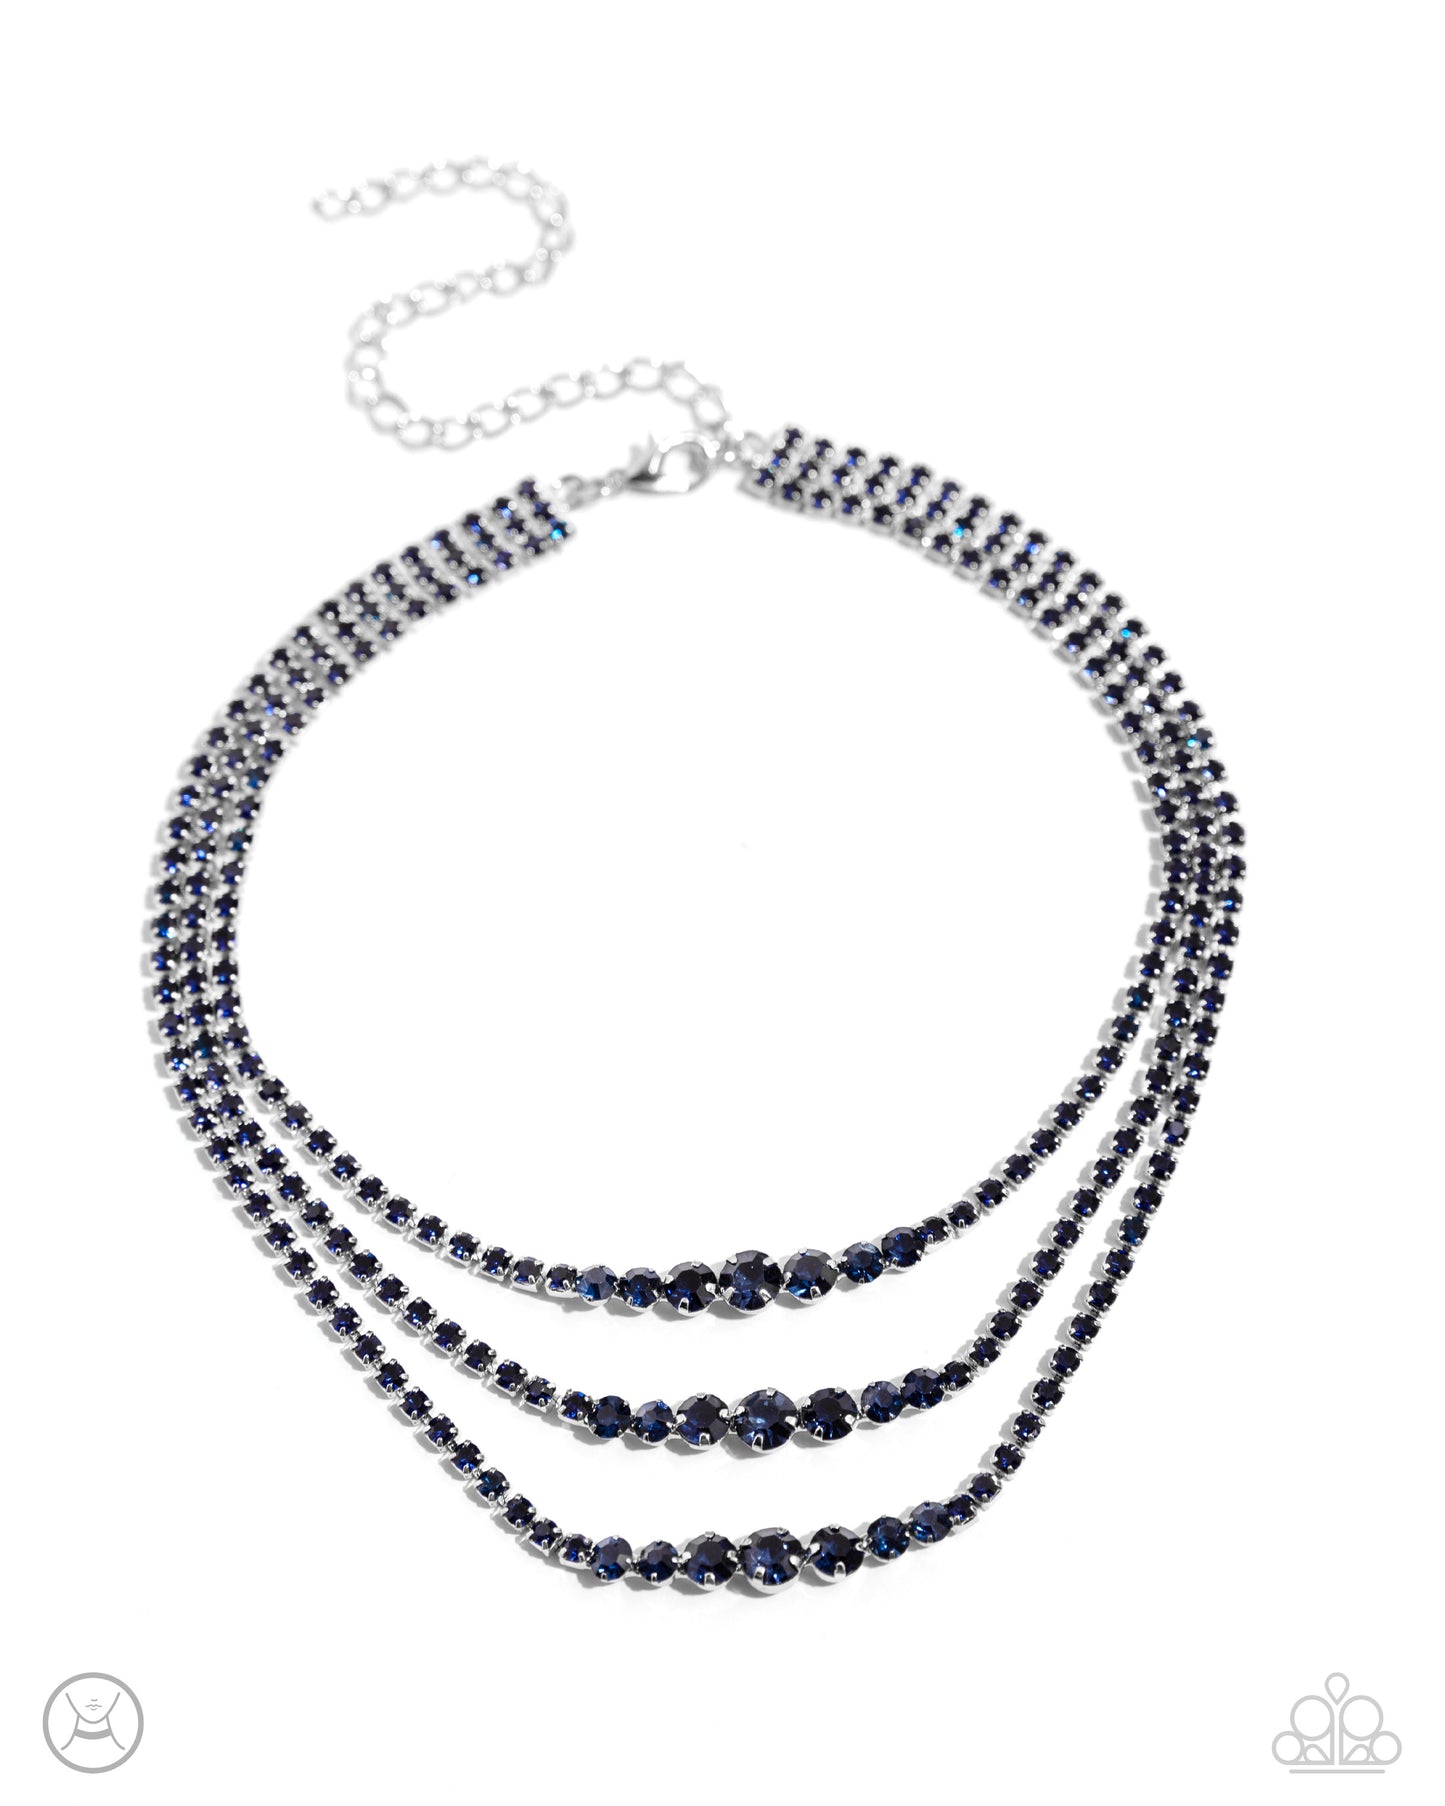 Paparazzi Accessories - Dynamite Debut - Blue Choker Necklaces set in pronged square silver fittings, blue rhinestones gradually increase to larger blue gems in pronged fittings as they cascade down the chest in a trio of layers for a dynamite display. Features an adjustable clasp closure.  Sold as one individual choker necklace. Includes one pair of matching earrings.